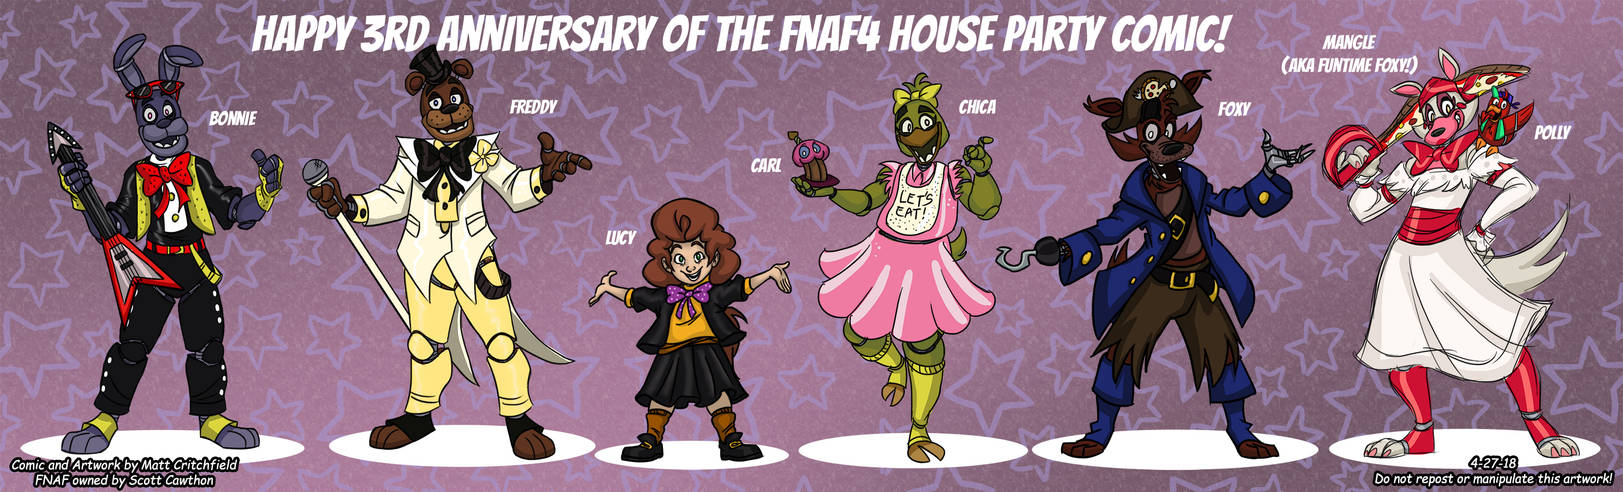 FNAF4 House Party - Cast Lineup - 4-27-18